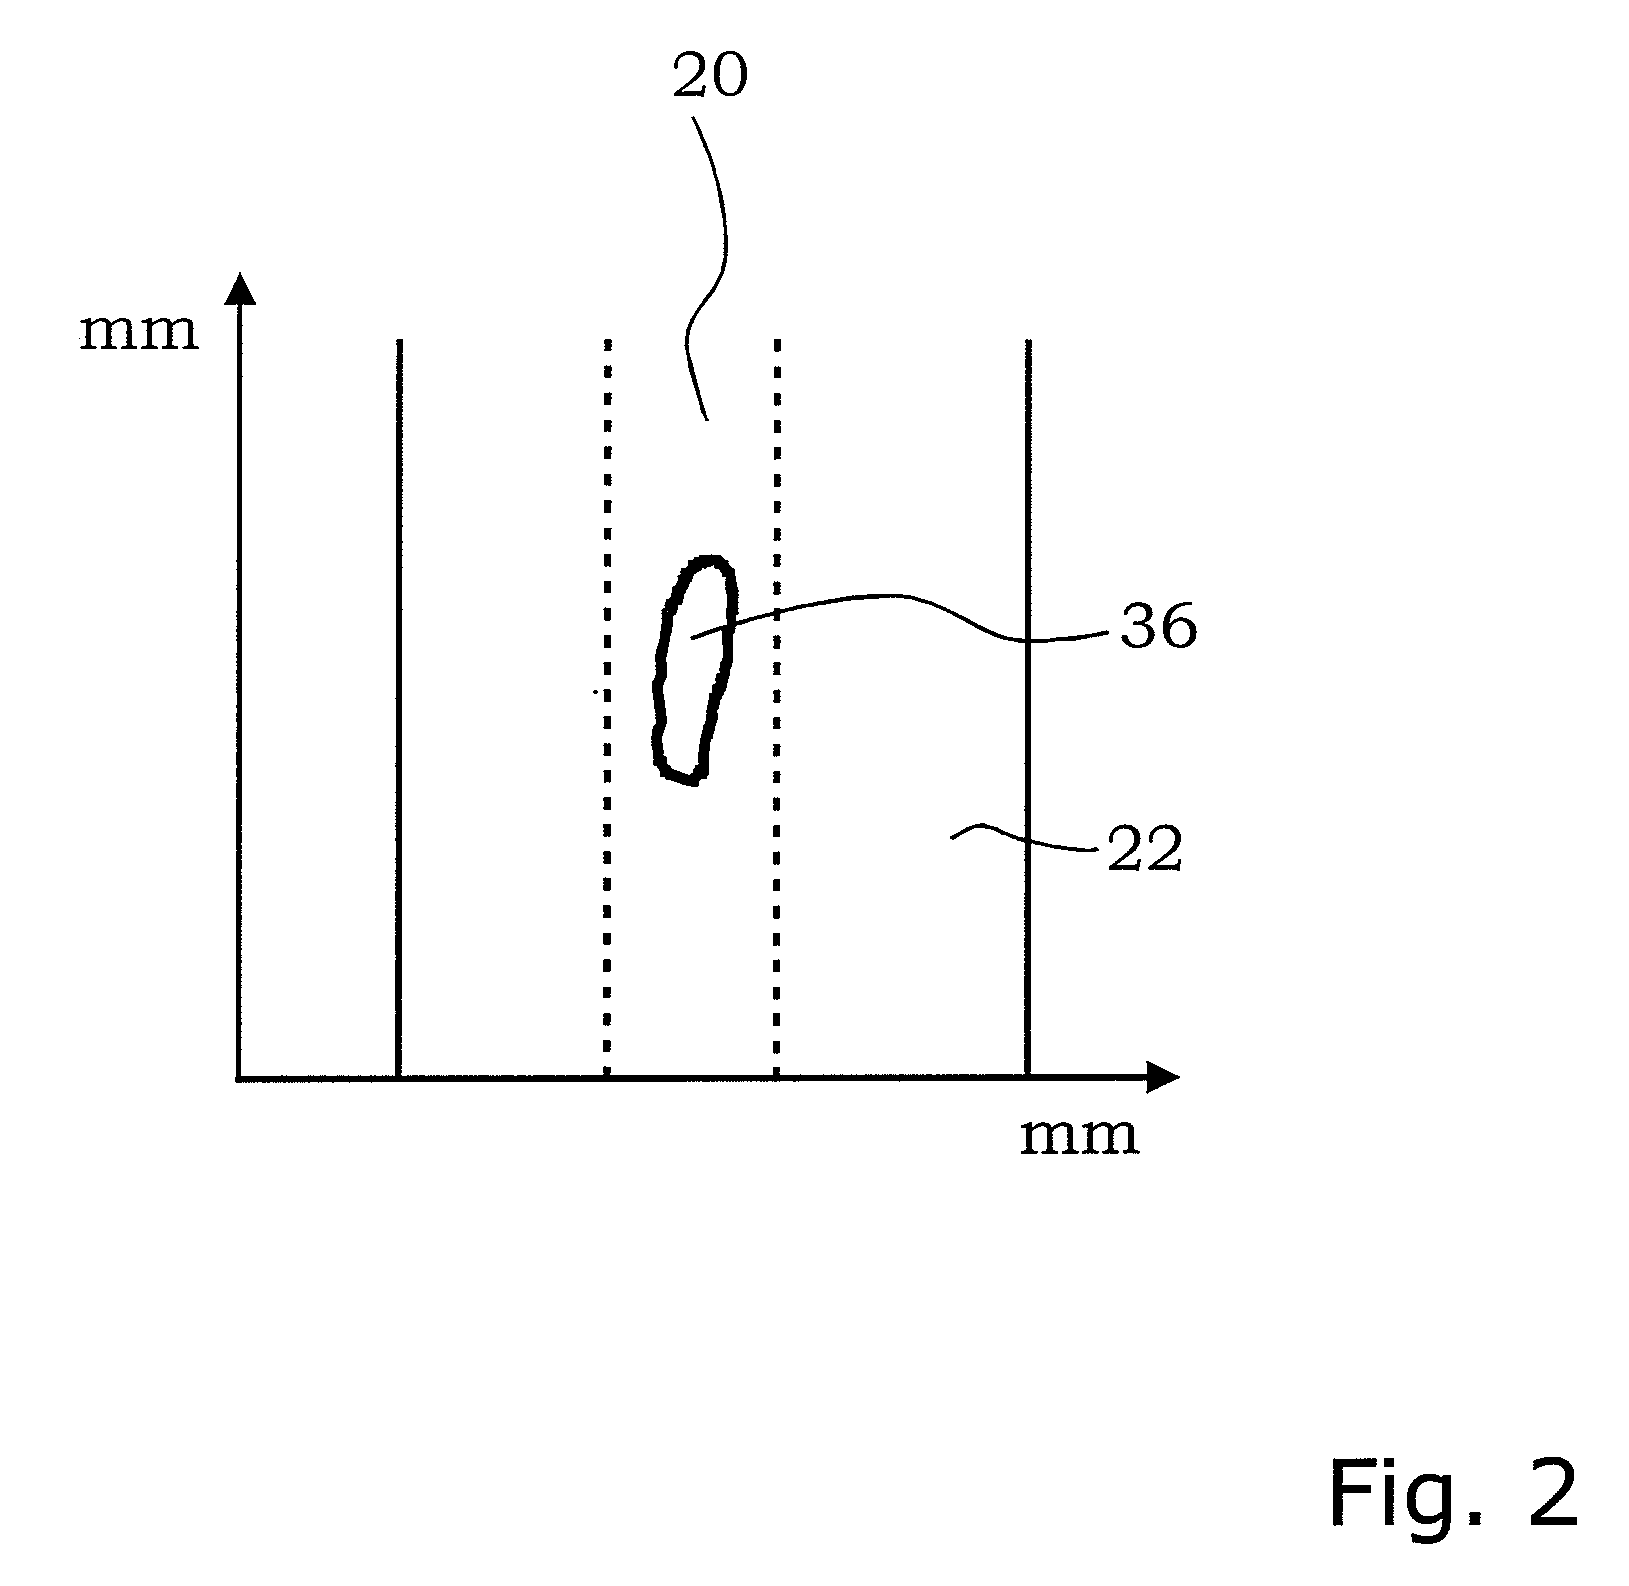 Ultrasound Test Device with Array Test Probes